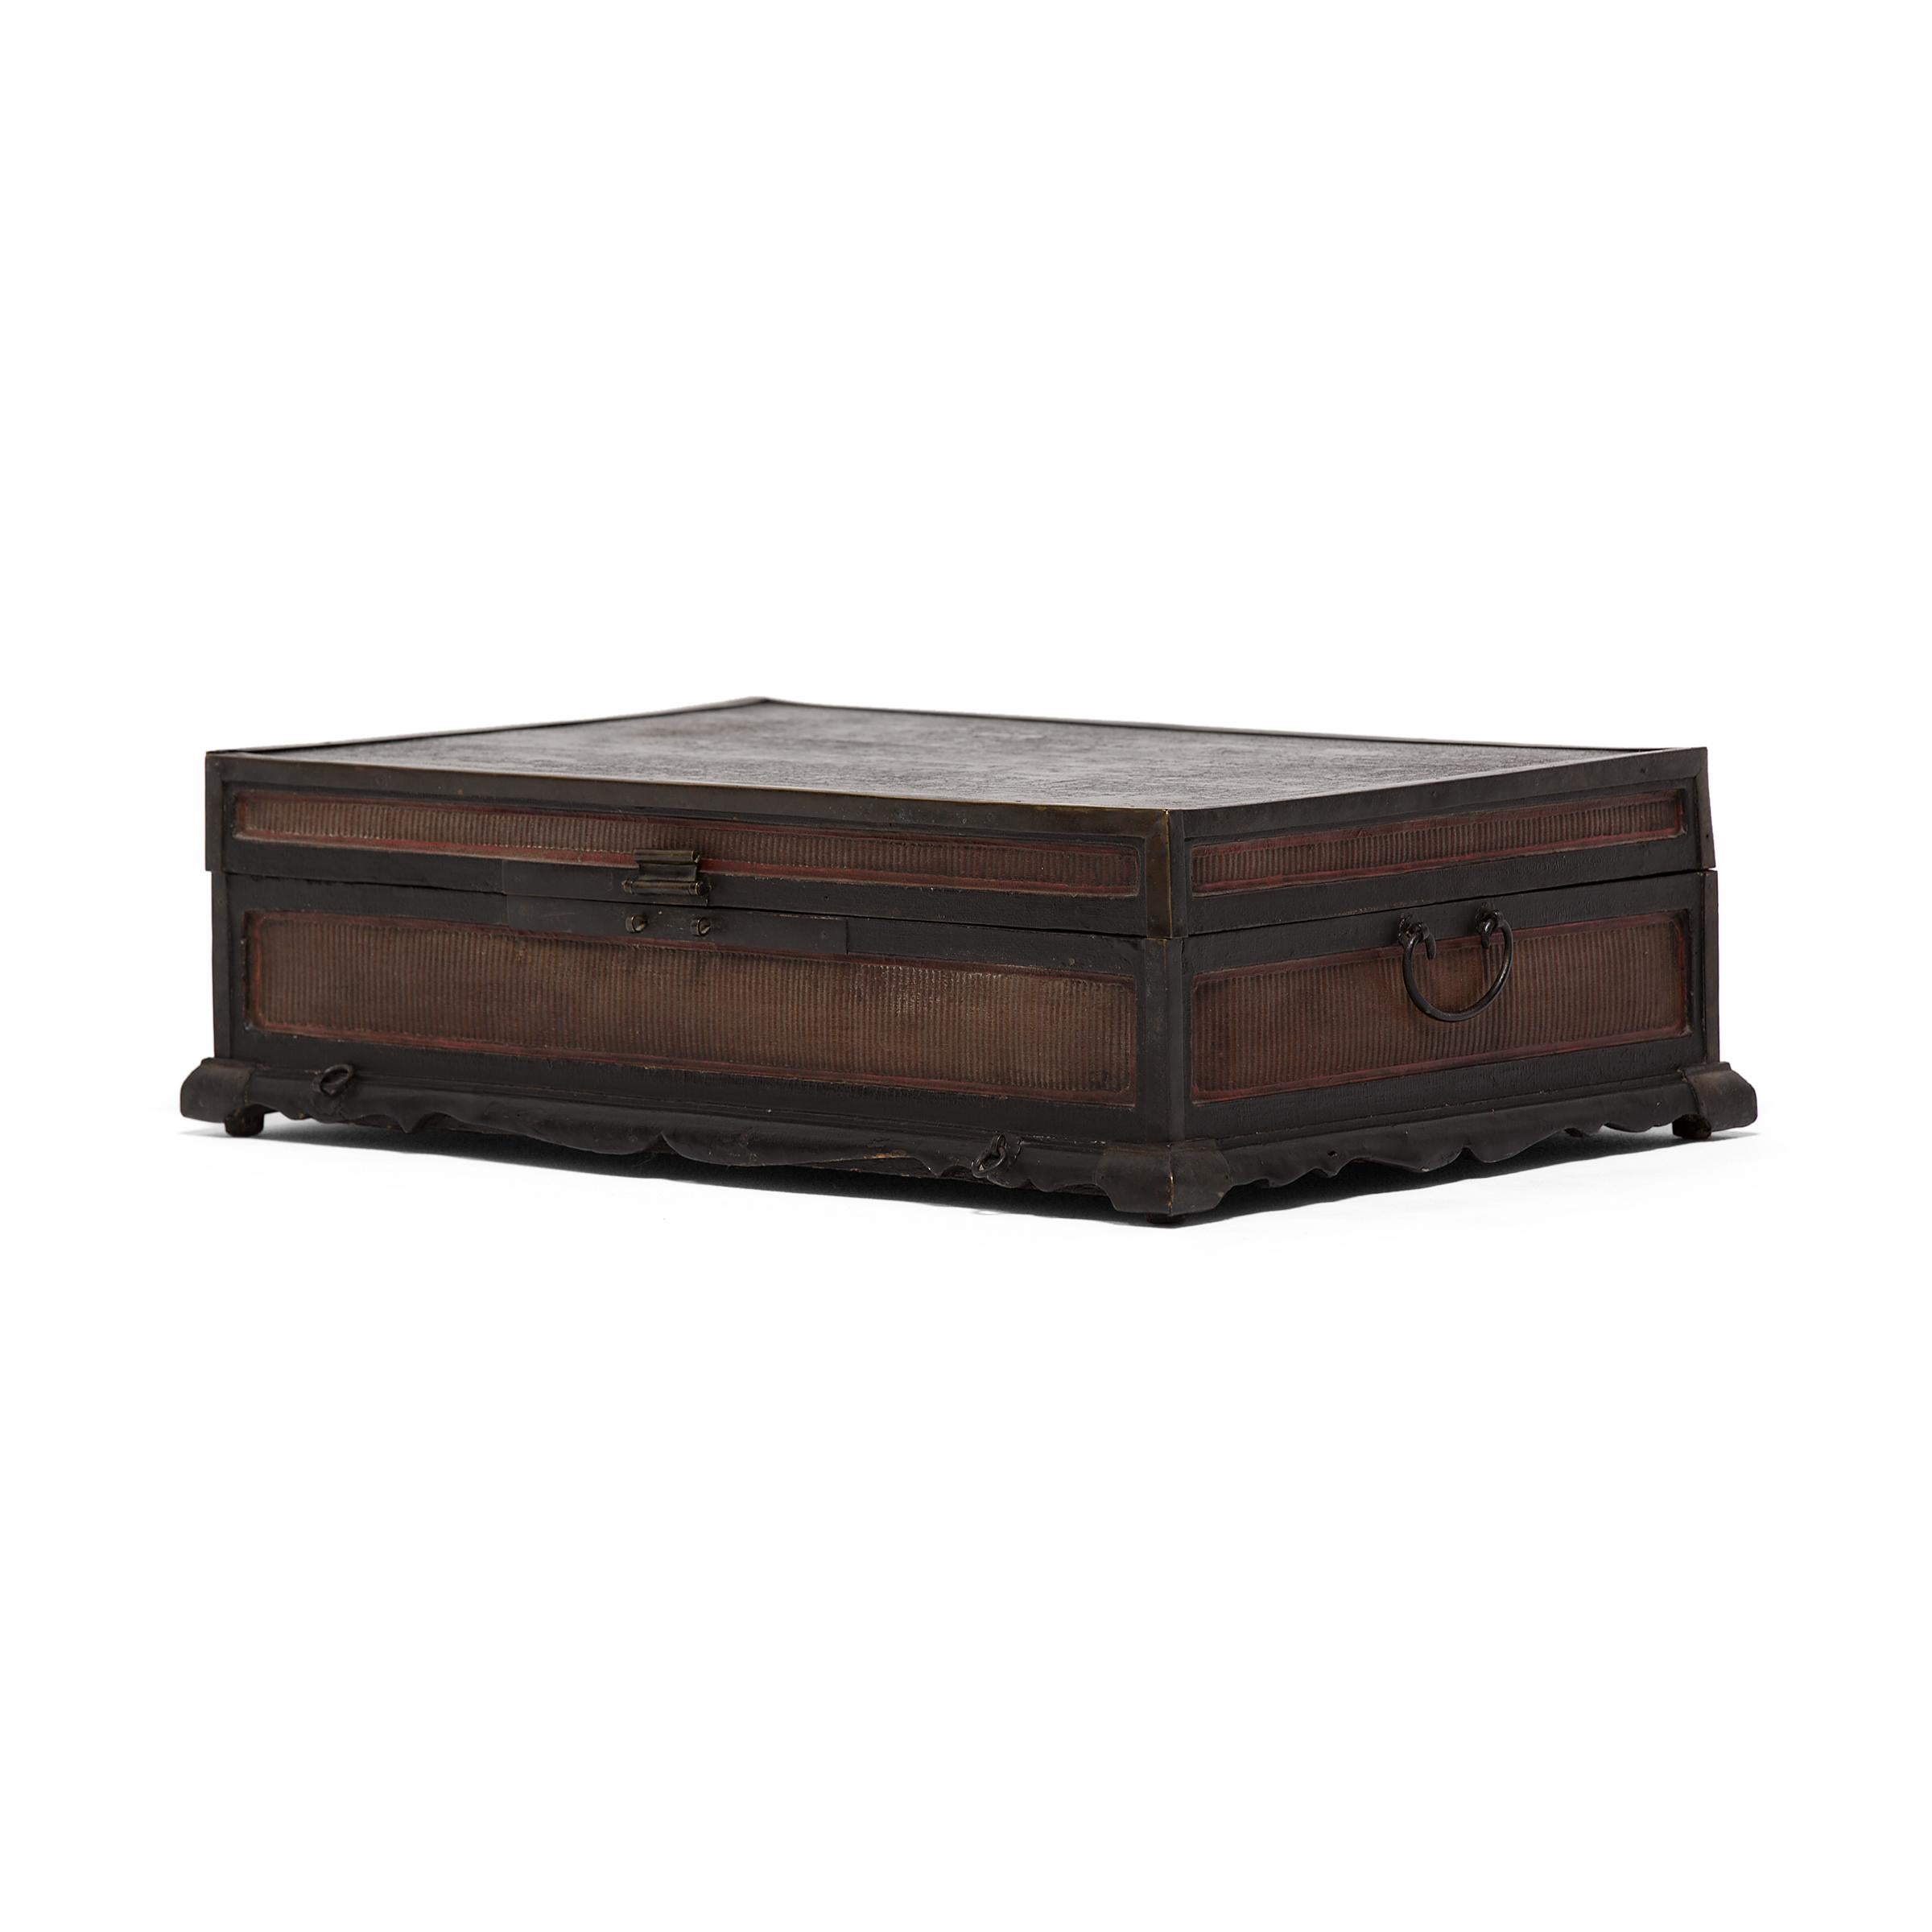 This 18th-19th century finely woven trunk was originally used to safely store painted scrolls. A skilled artisan painstakingly wove thin-as-hair reeds to cover each of the side panels, protected and reinforced by original brass corner mounts. The